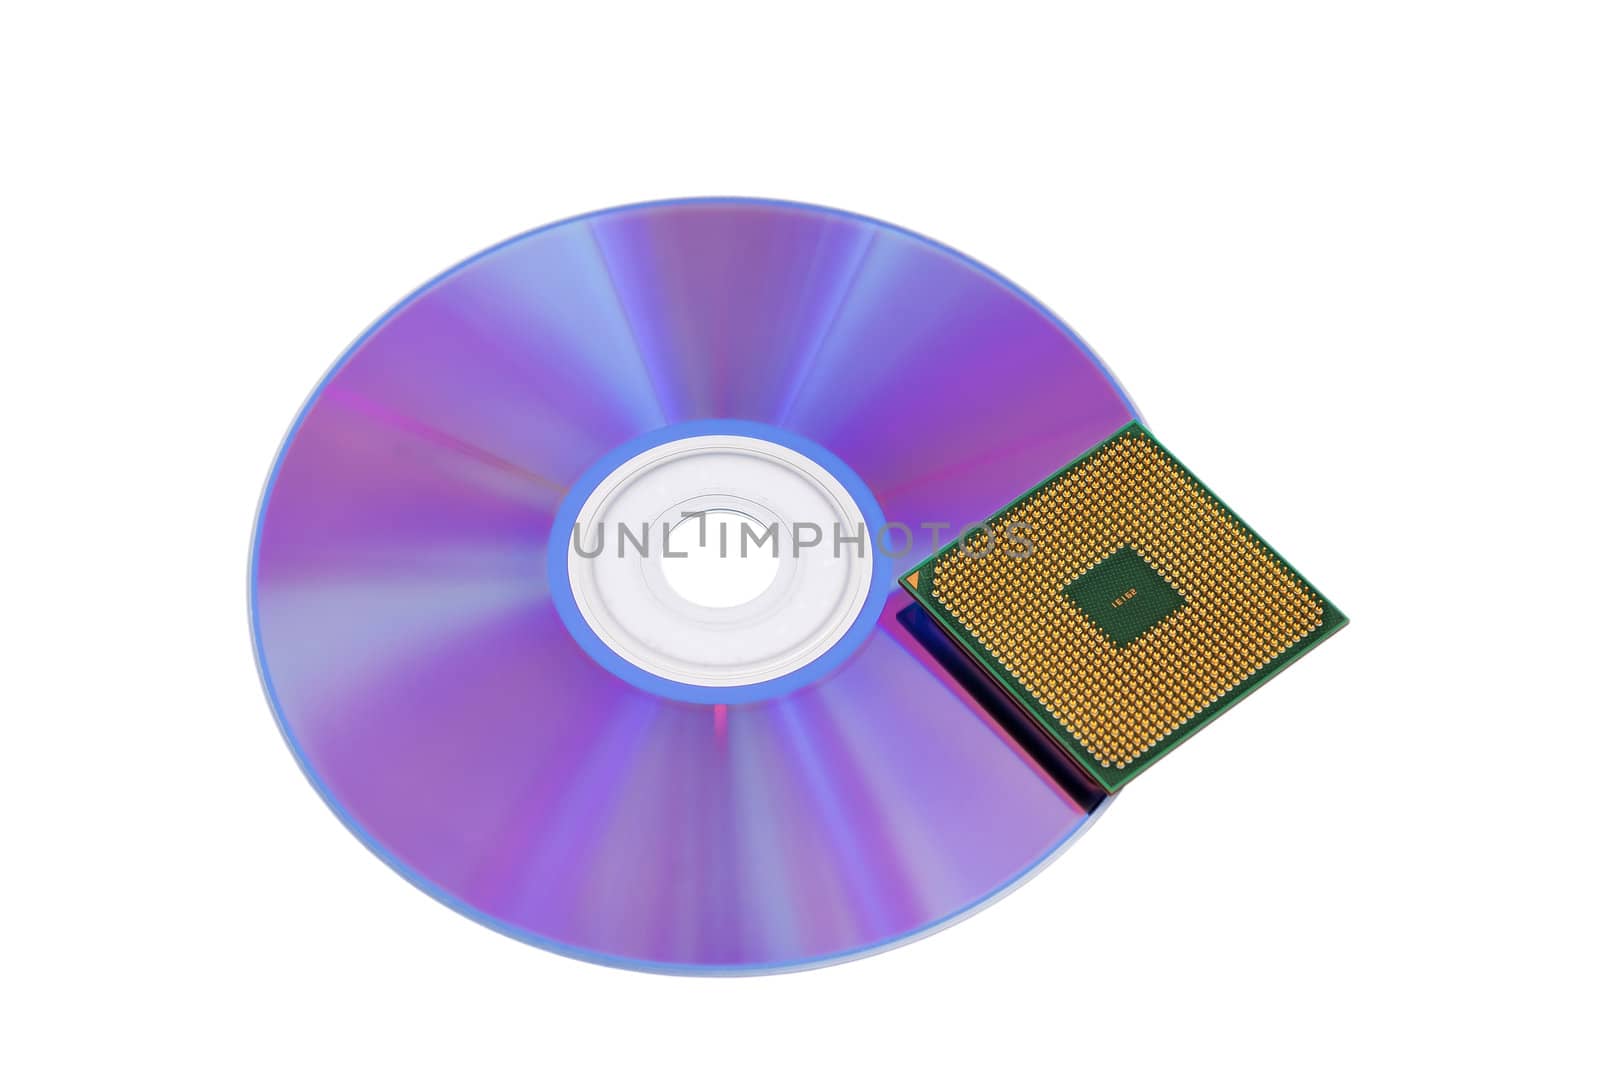 optical disk and CPU on a white background